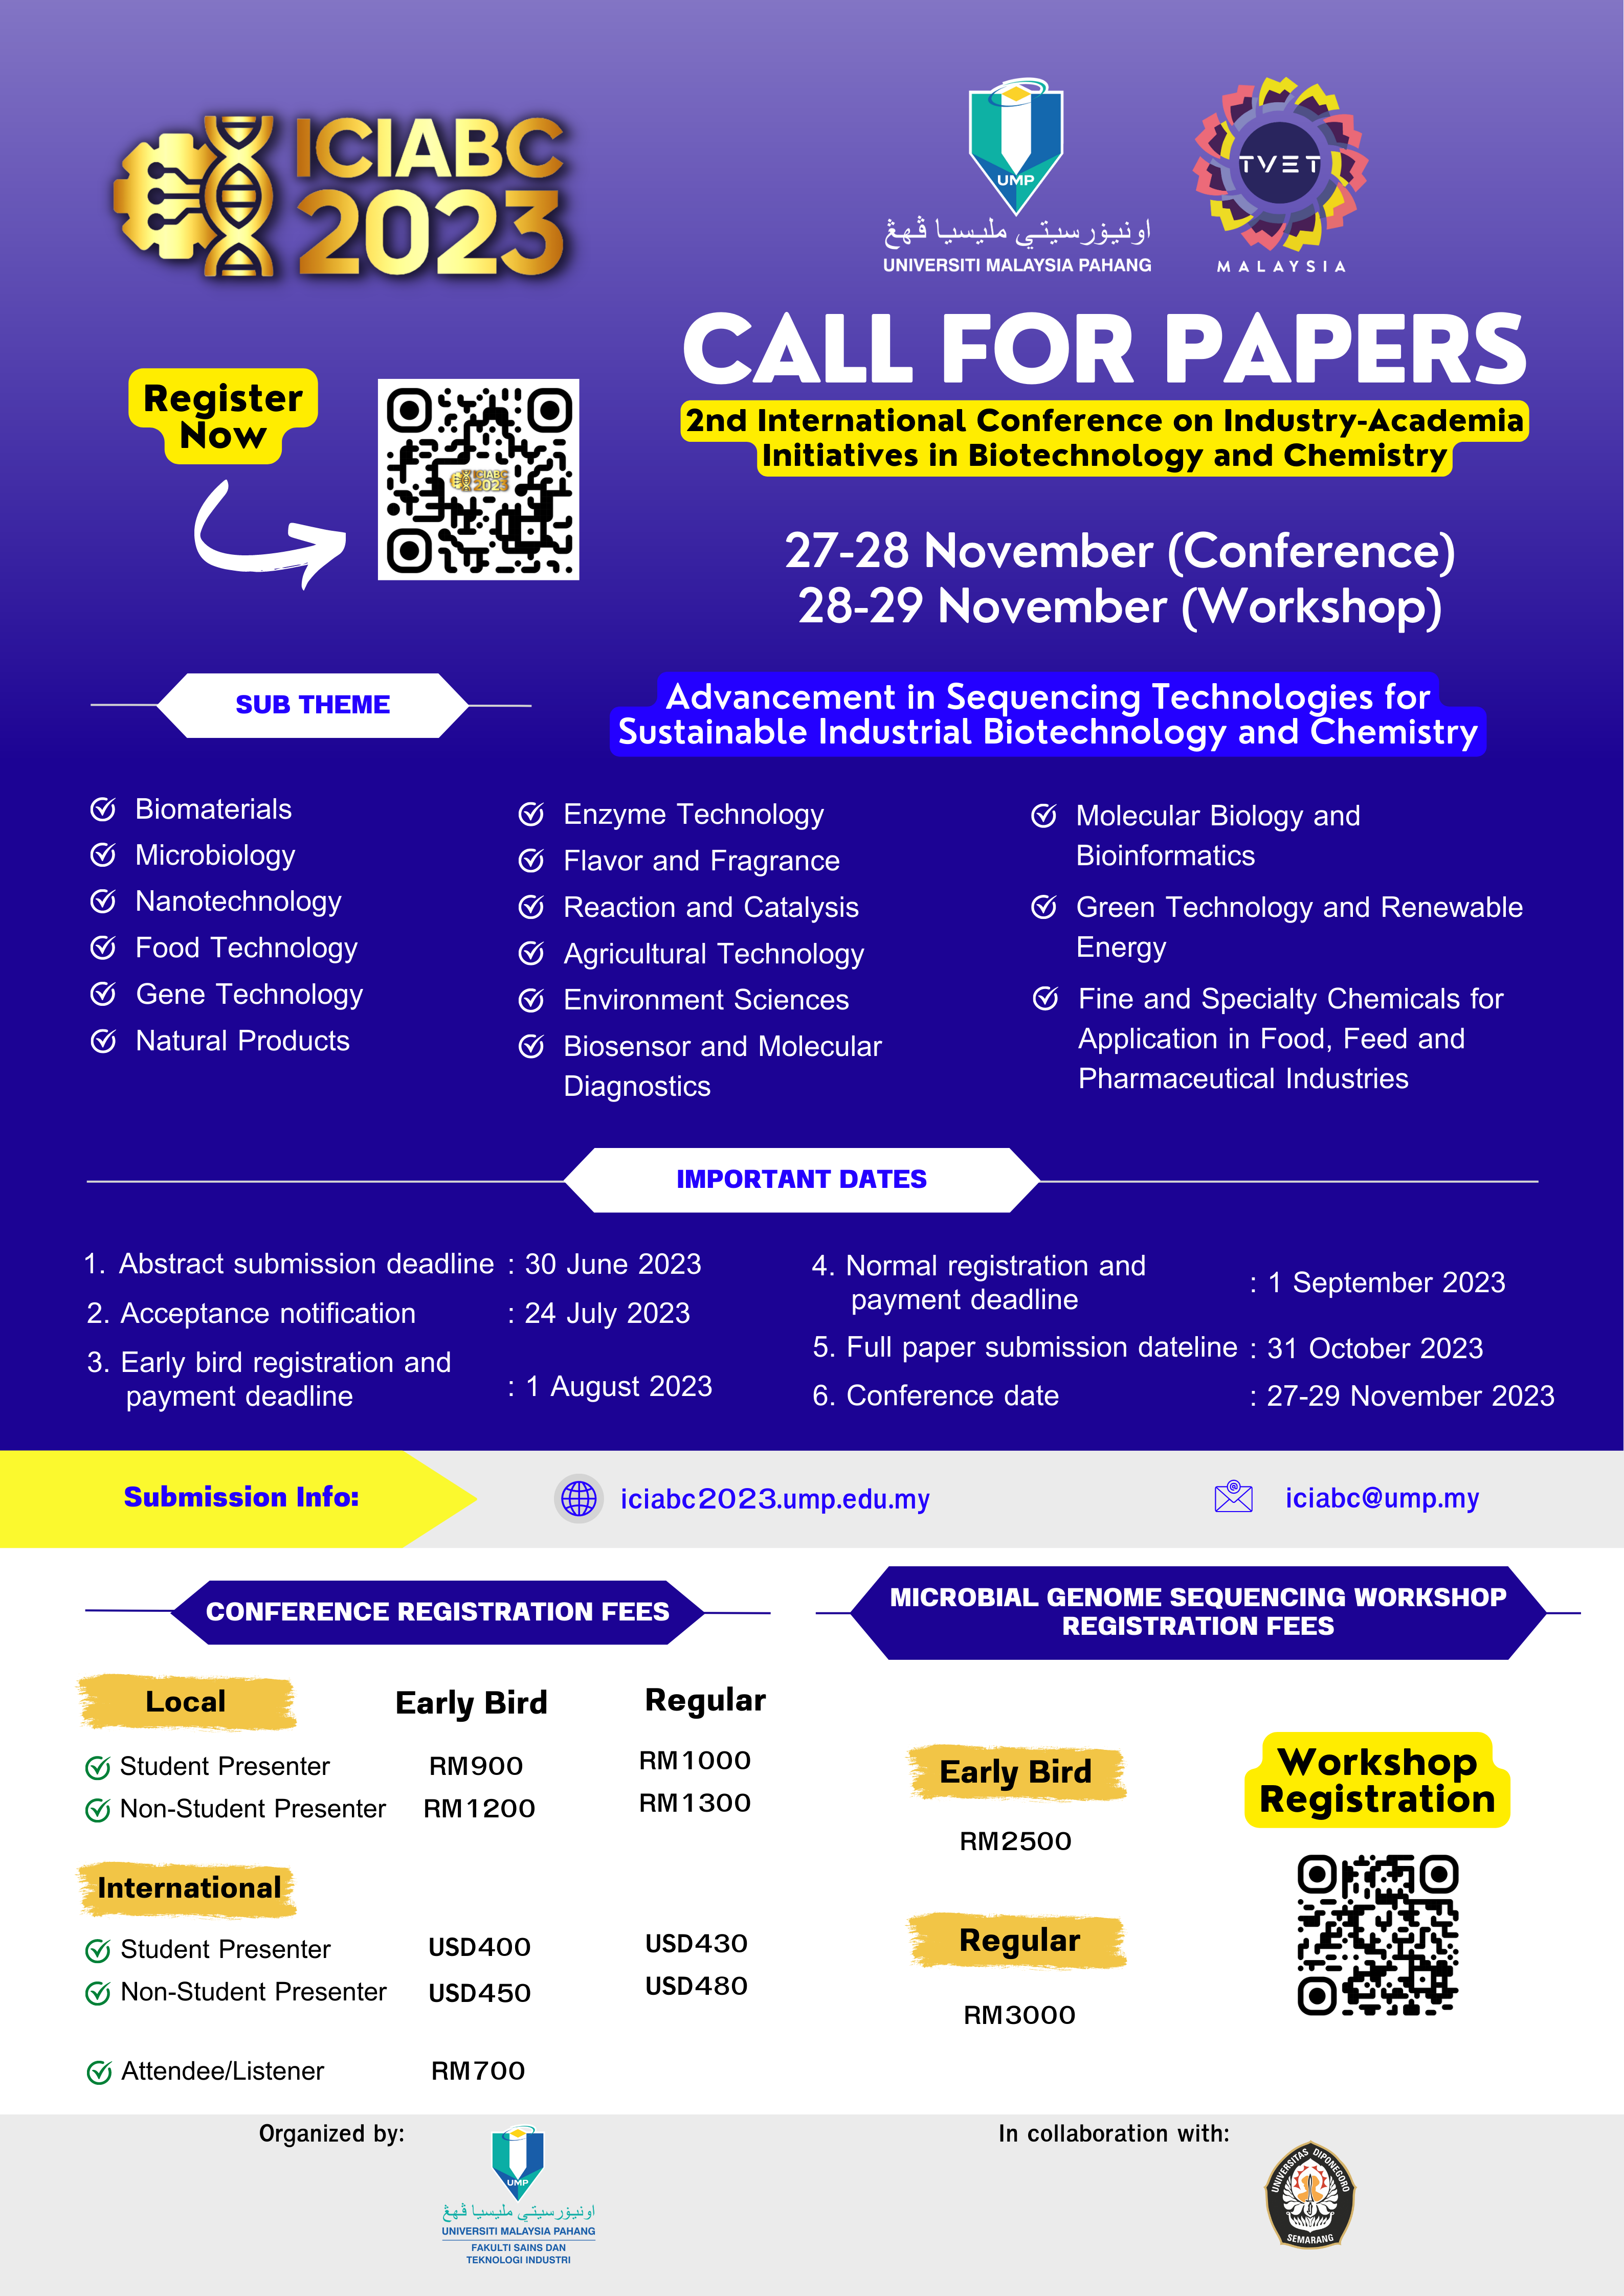 The 2nd International Conference on Industry-Academia Initiatives in Biotechnology and Chemistry (iCIABC2023)